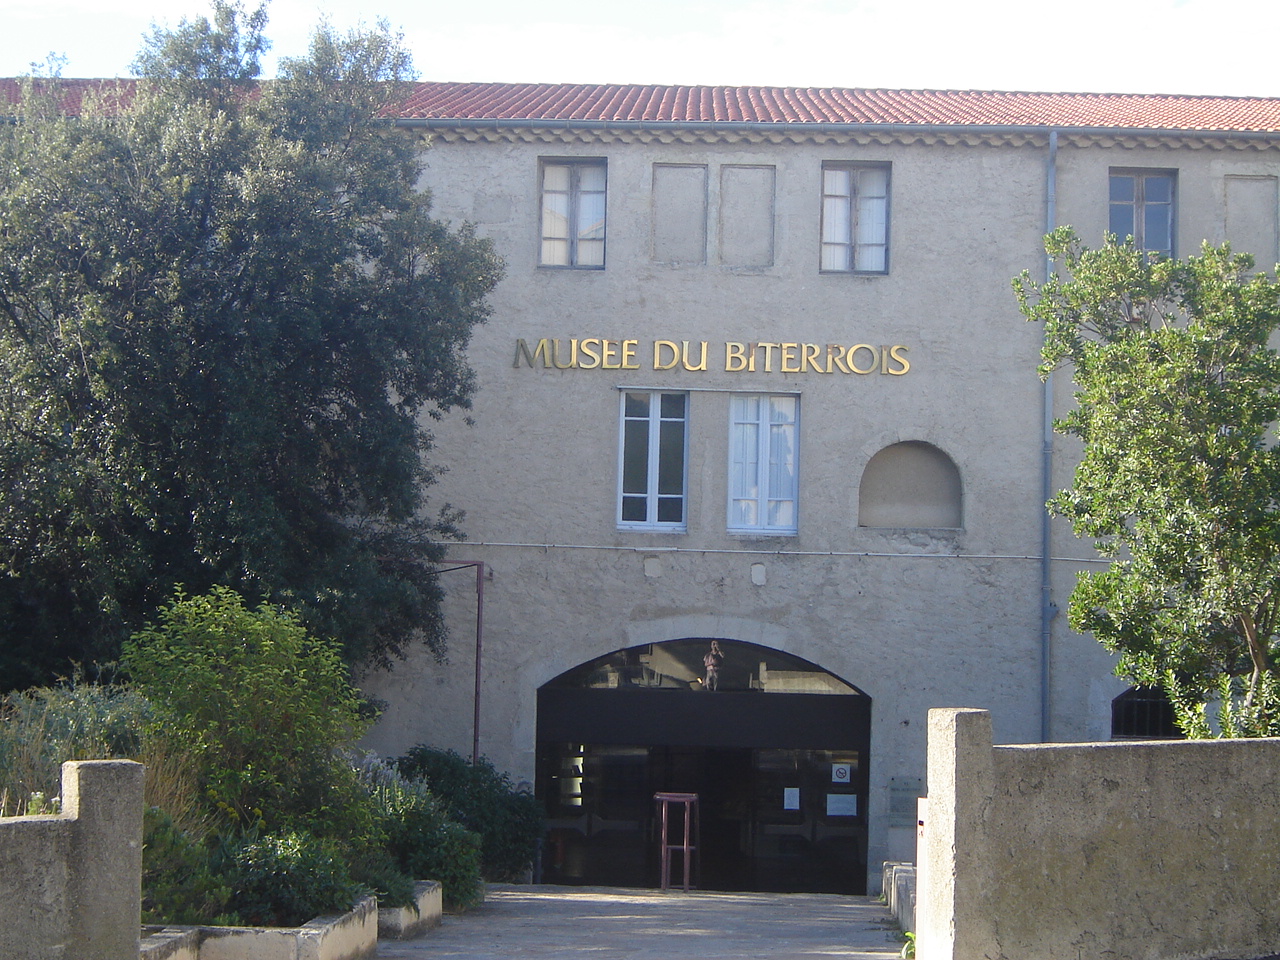 Museum of the Biterrois of Béziers